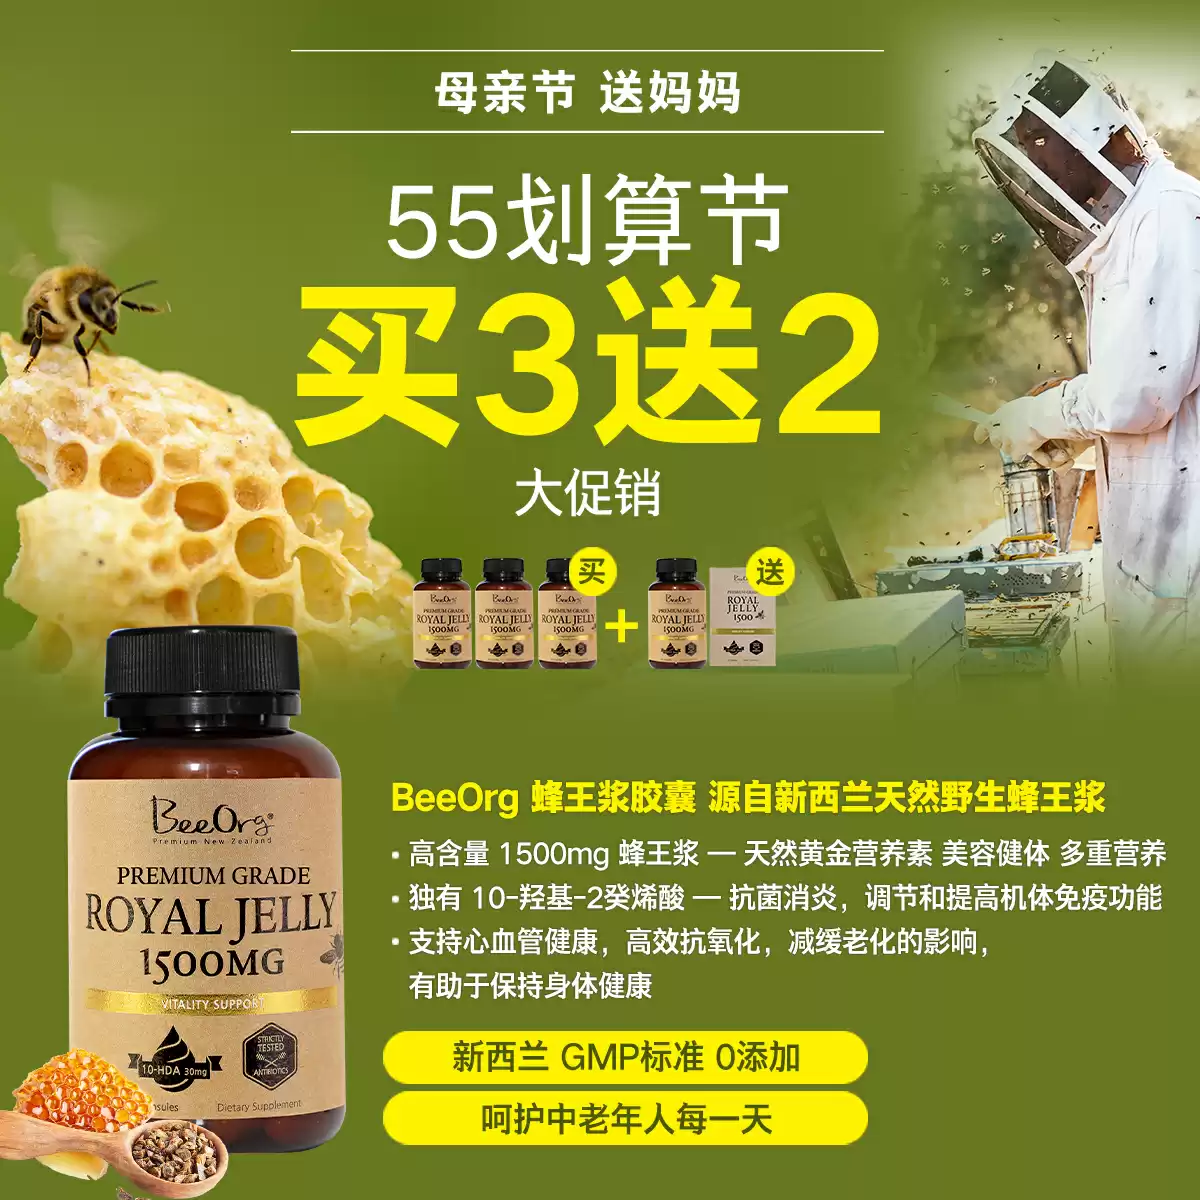 BEEORG Royal Jelly High Strength 90caps buy 3 get 2 for free